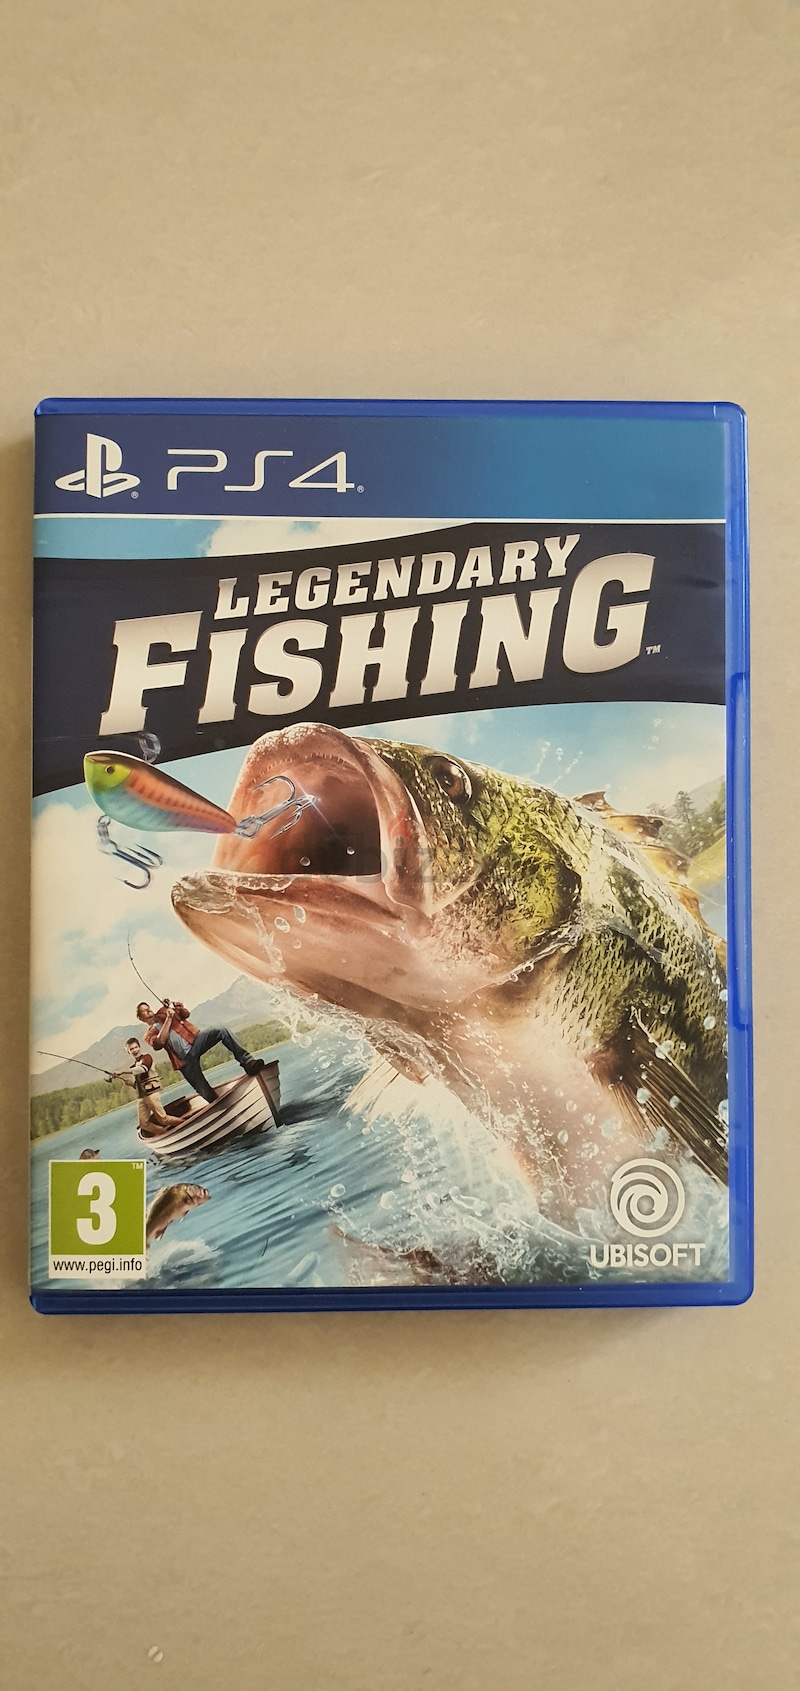 Ps4 legendary fishing Aed 80